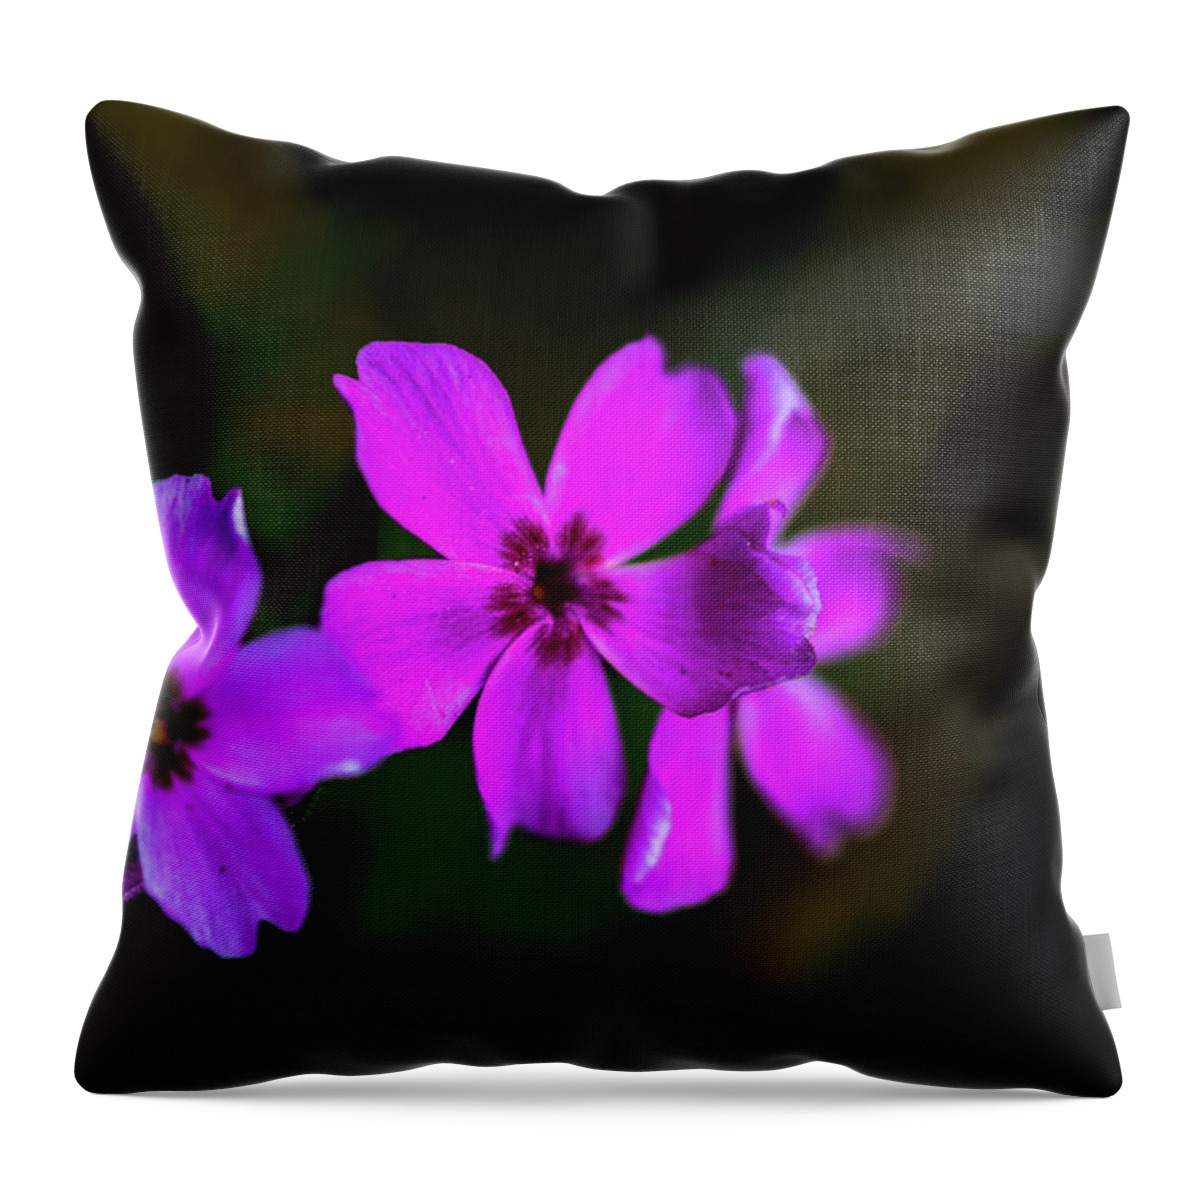 Jay Stockhaus Throw Pillow featuring the photograph Purple by Jay Stockhaus